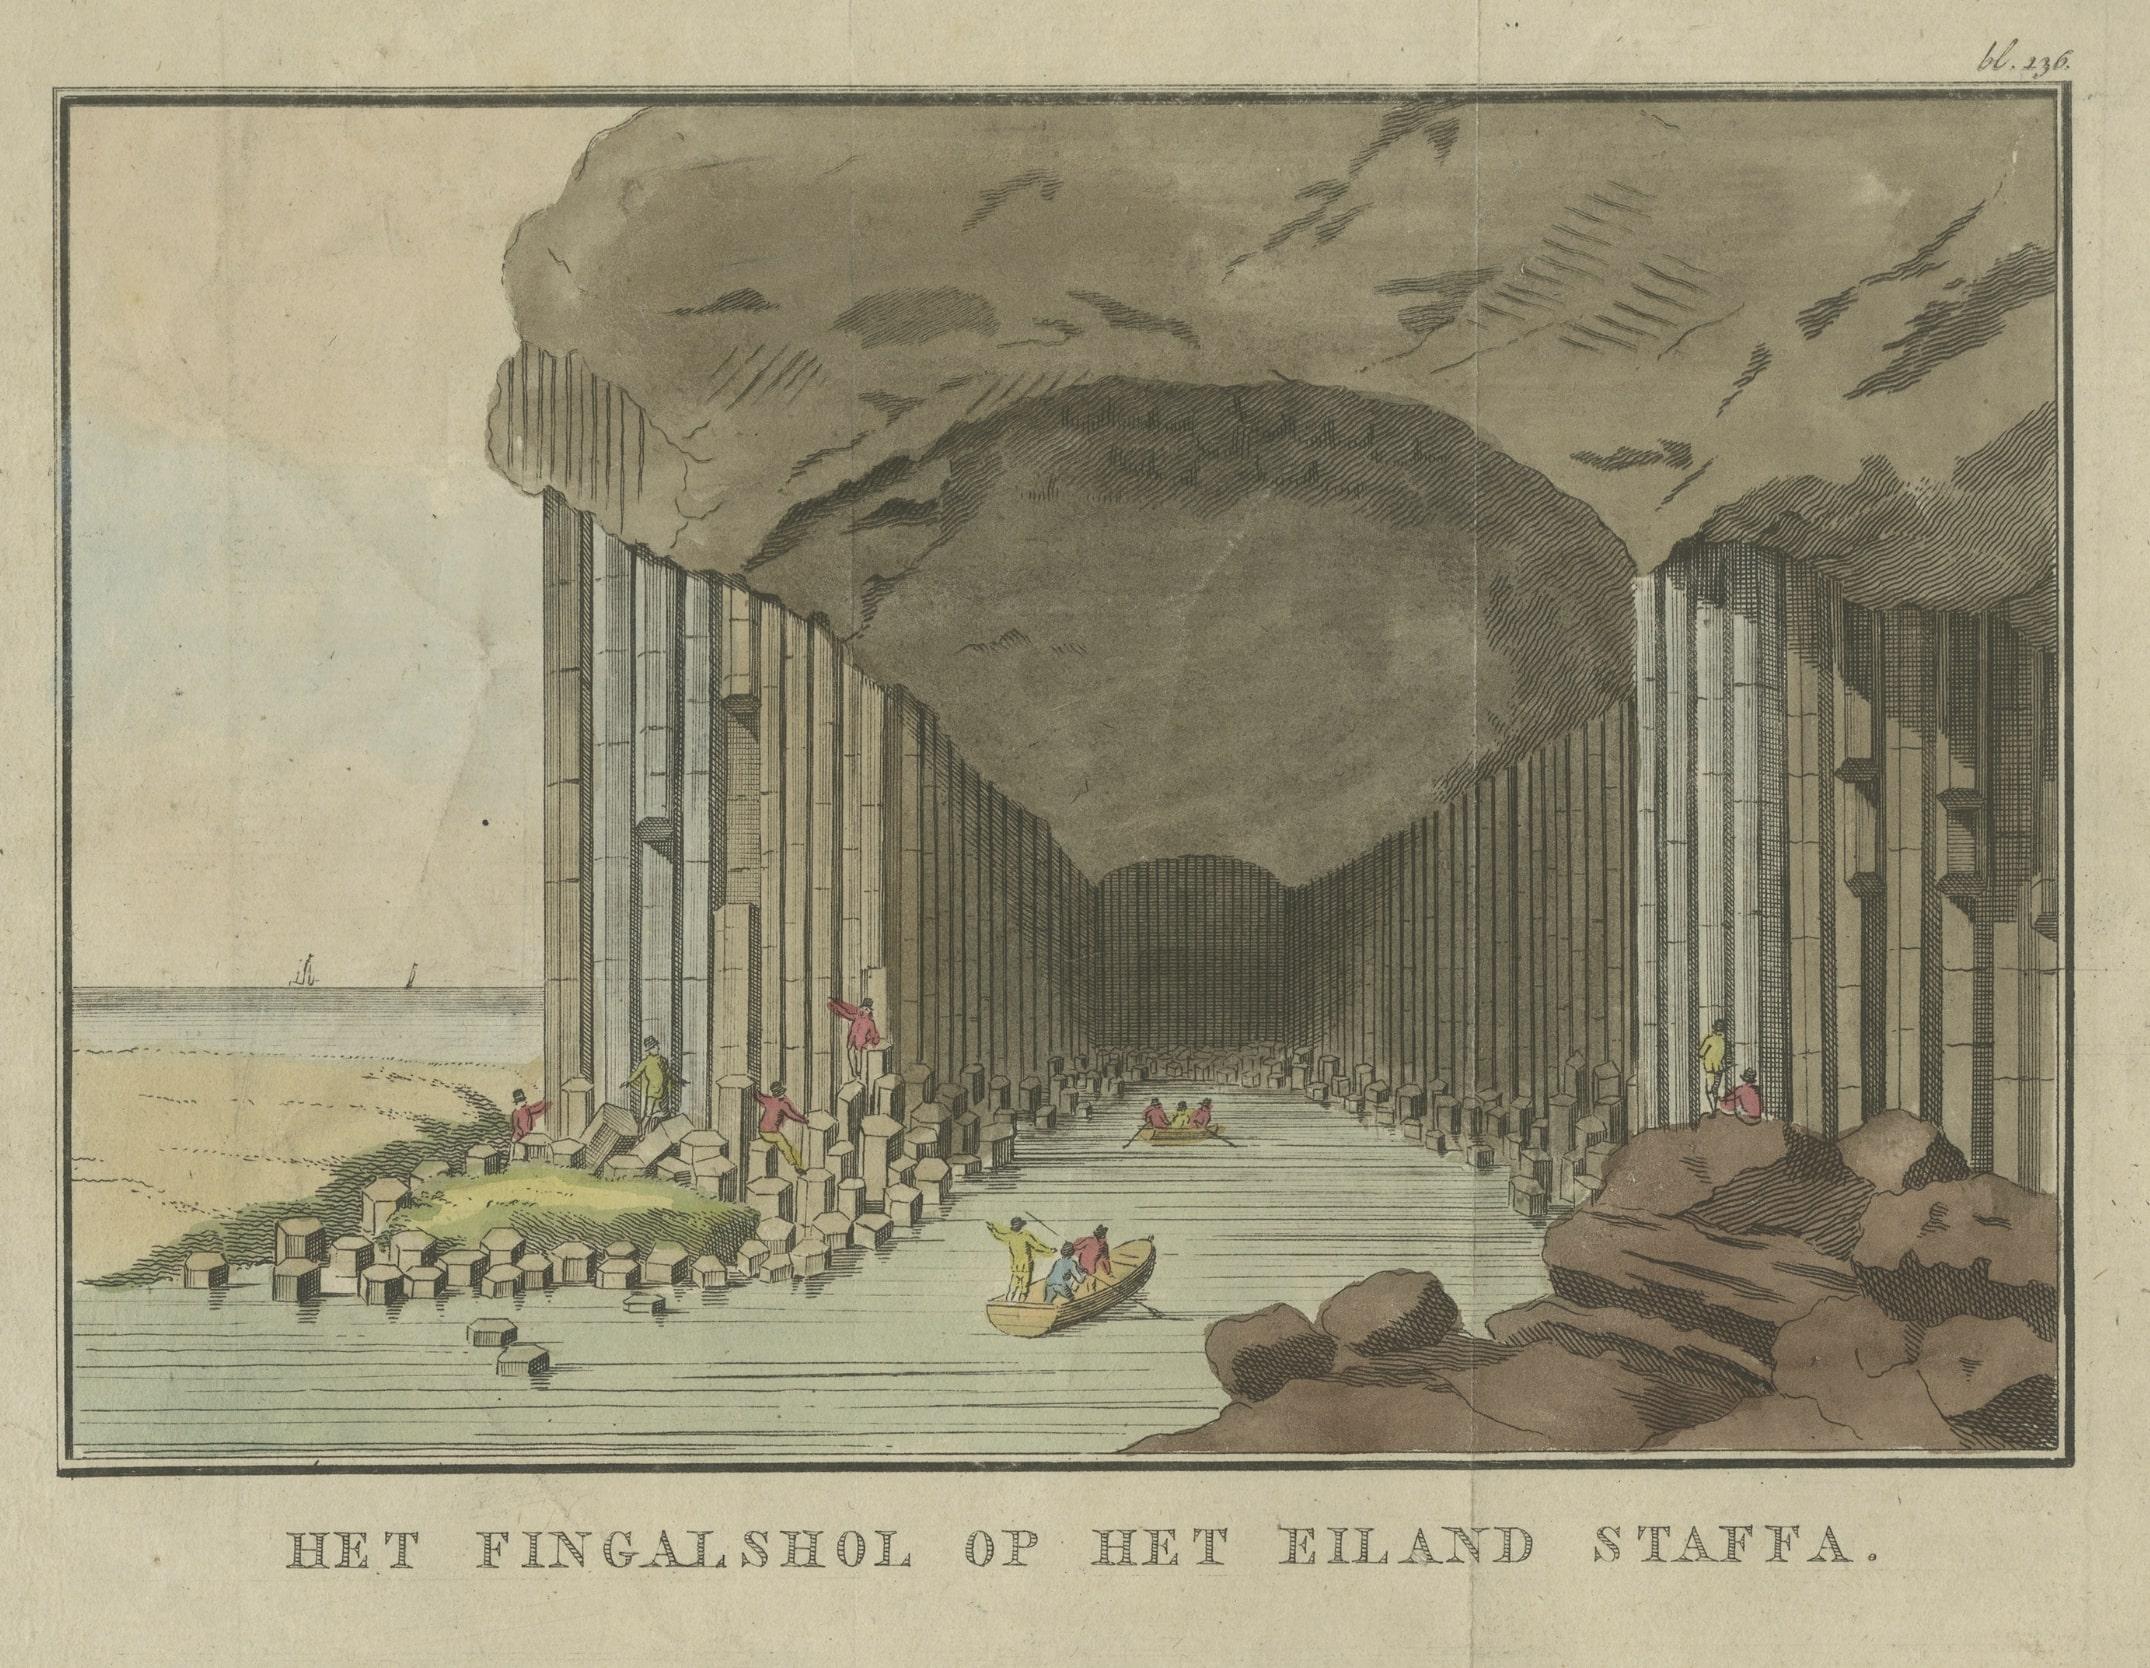 Antique print titled 'Het Fingalshol op het Eiland Staffa'. 

View of Fingal’s Cave, a natural wonder off the coast of Scotland in the Hebrides, renowned for its striking rock formations of faceted vertical pillars of basalt. This print originates